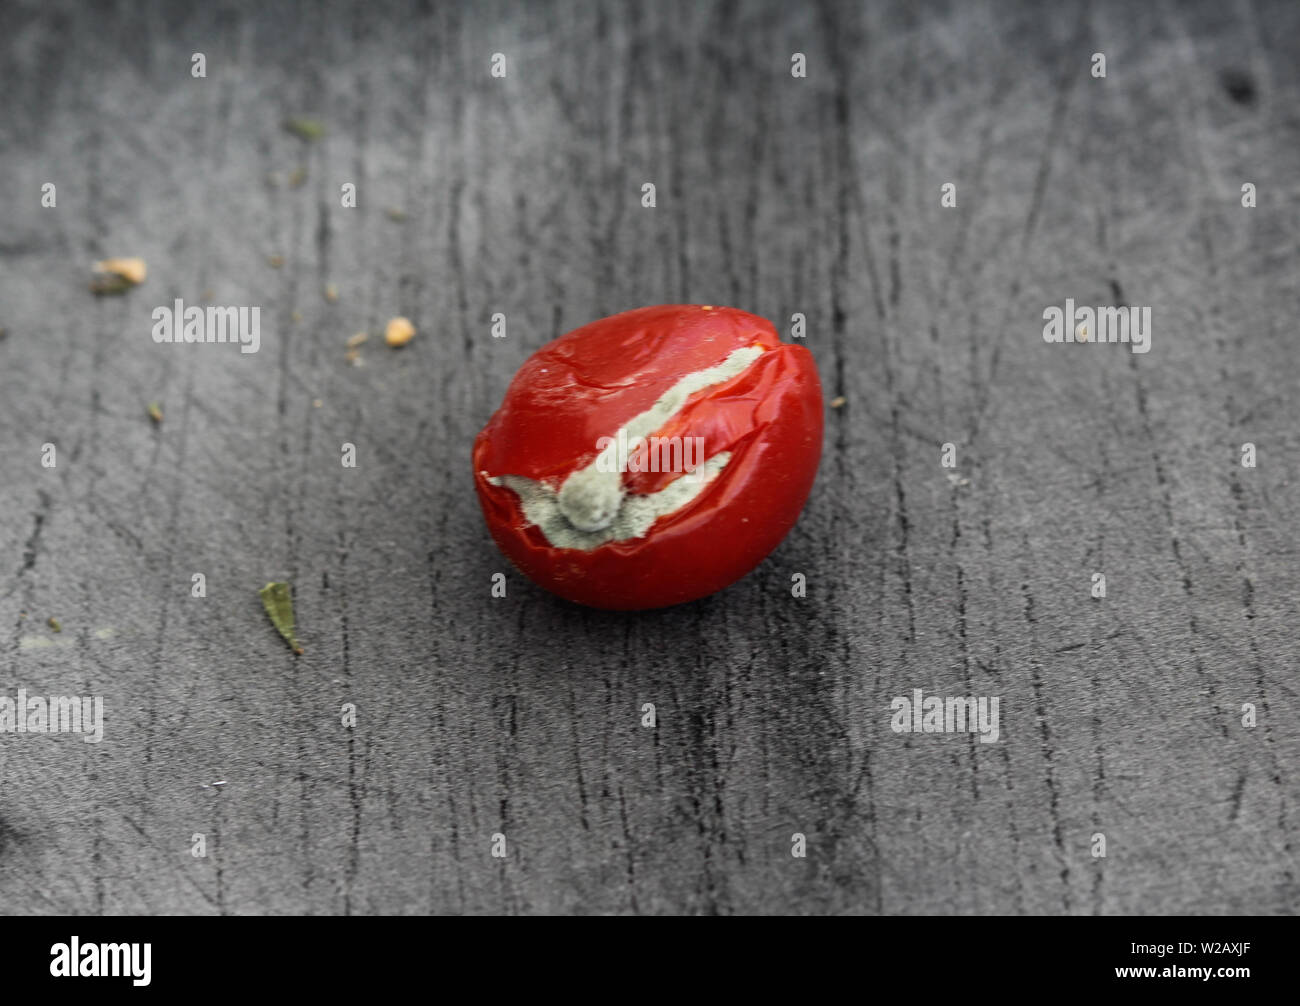 close up of Rotten cherry tomato on black cutting board background Stock Photo